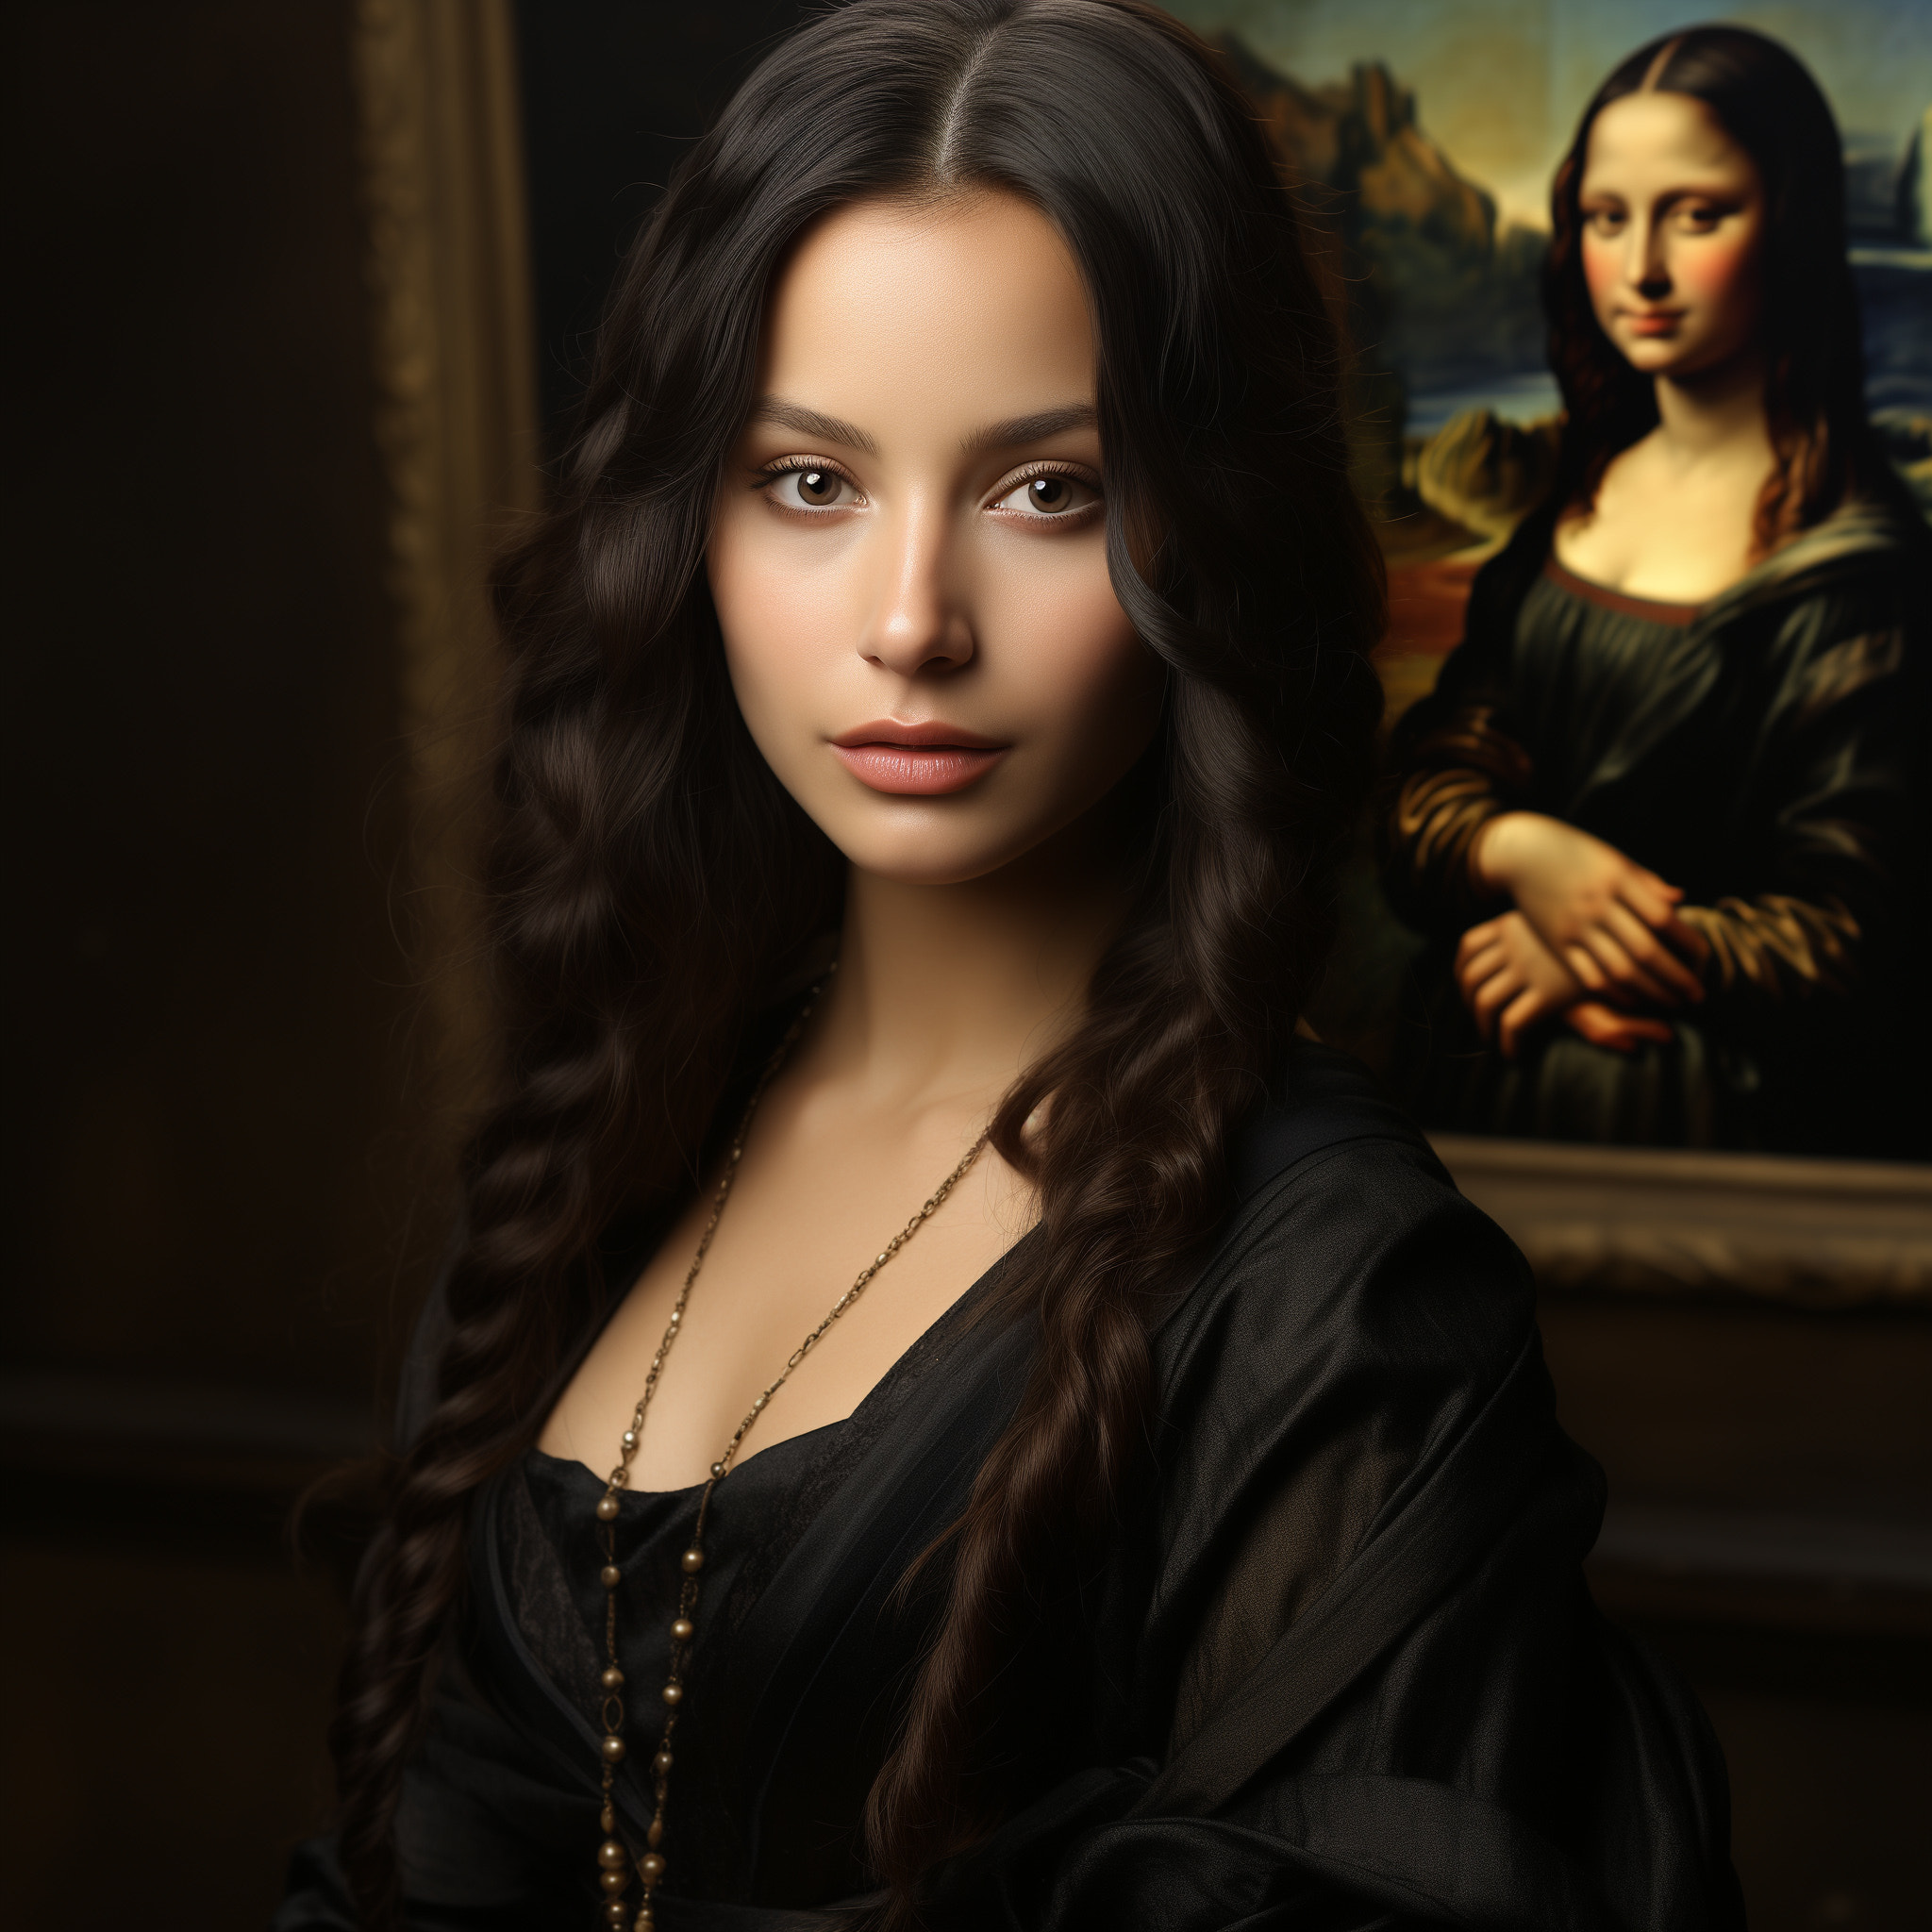 General 2048x2048 Manfred Digruber women AI art long hair curly hair portrait necklace Mona Lisa digital art painting parted lips brown eyes picture frames dark hair